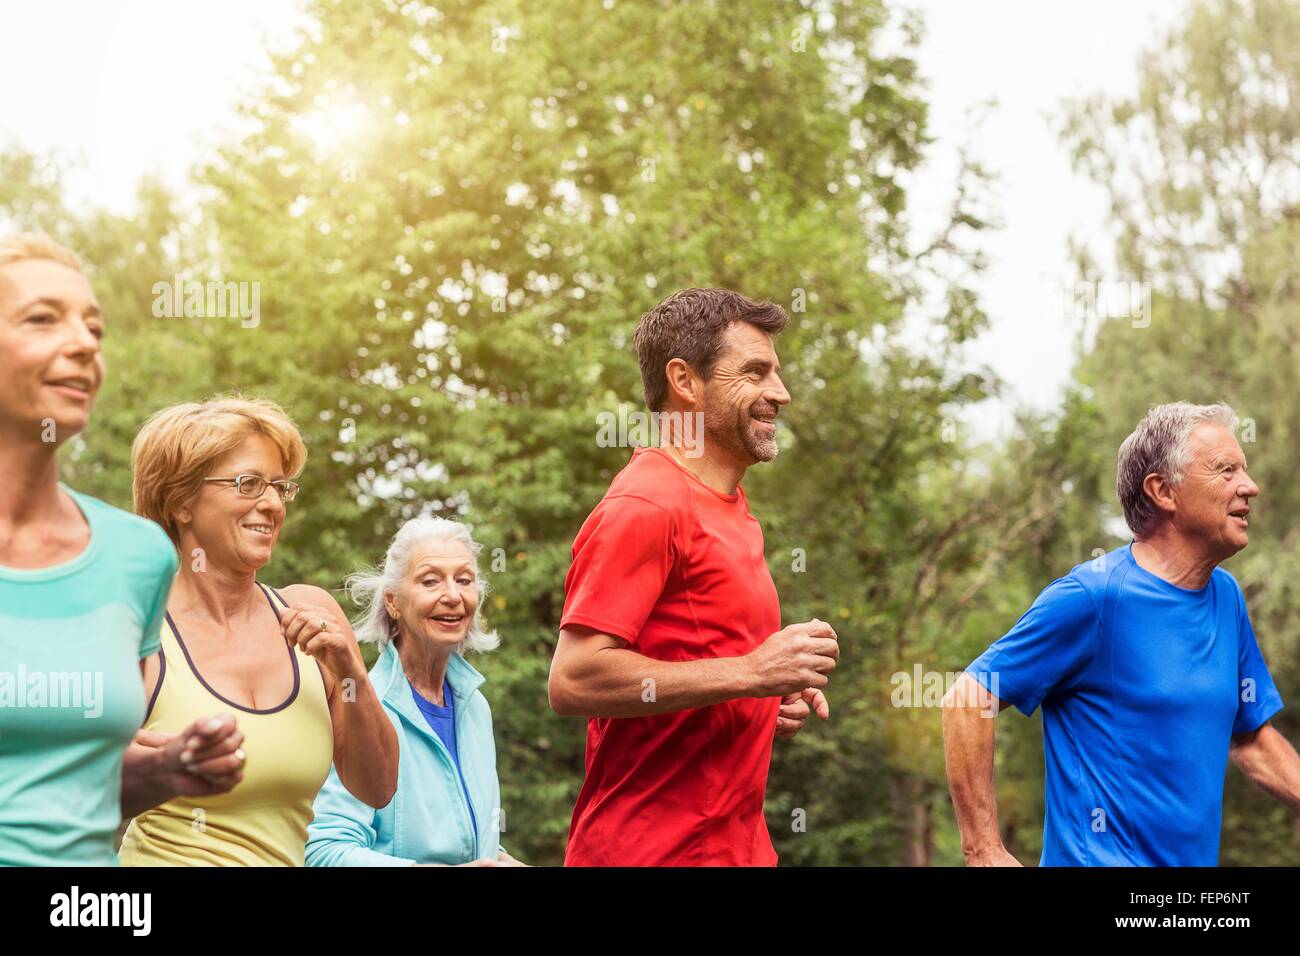 Group of adults running outdoors Stock Photo